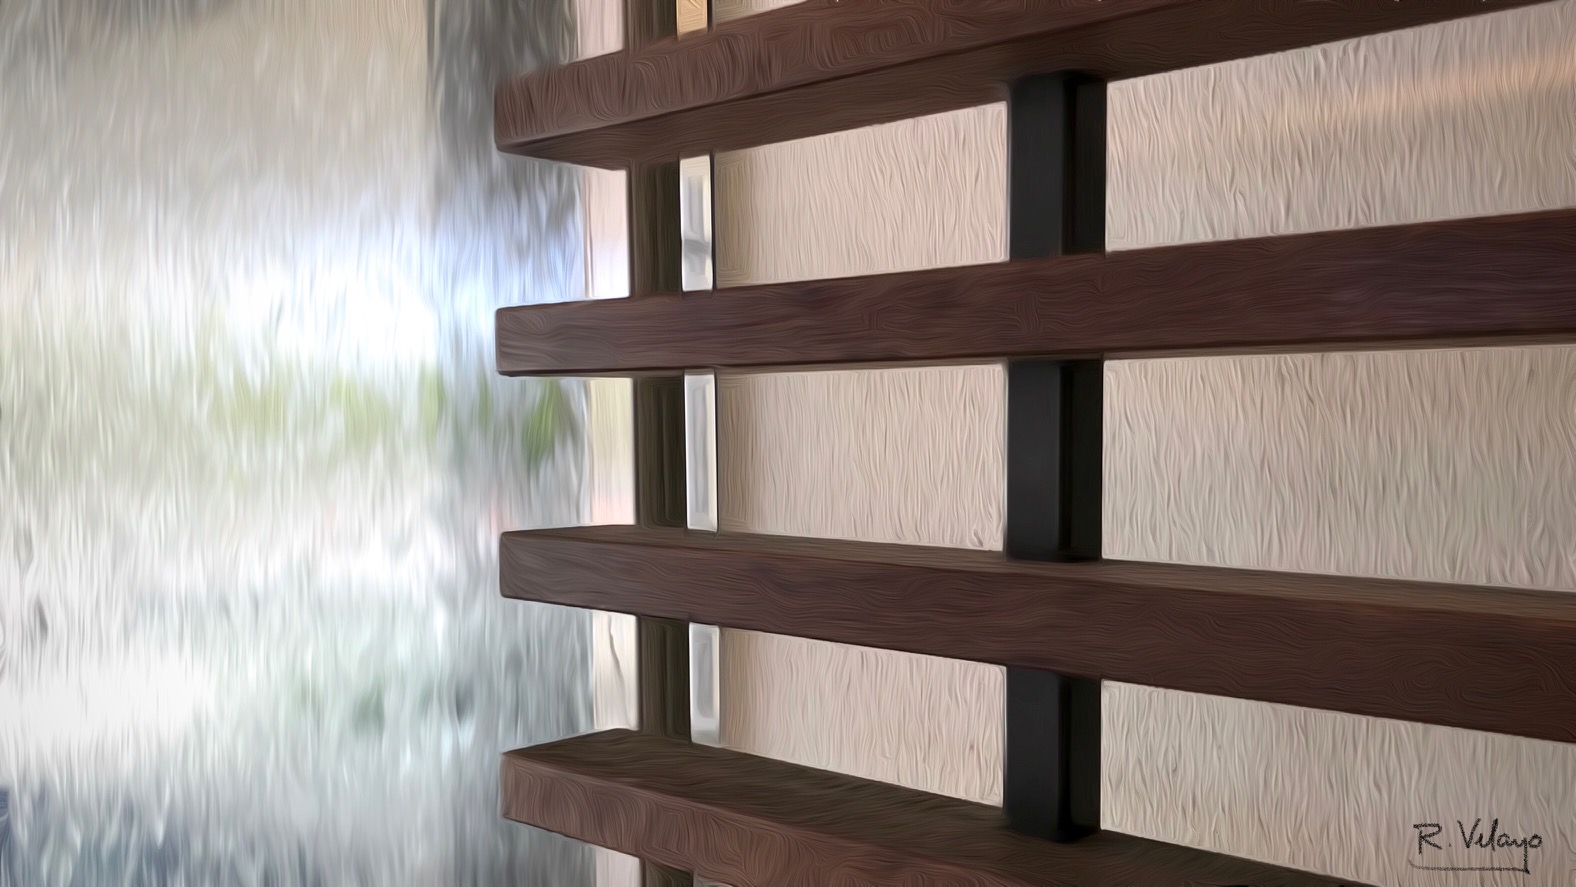 "ZEN WATER AND WOOD WALL DECOR" [Created: 9/04/2021]